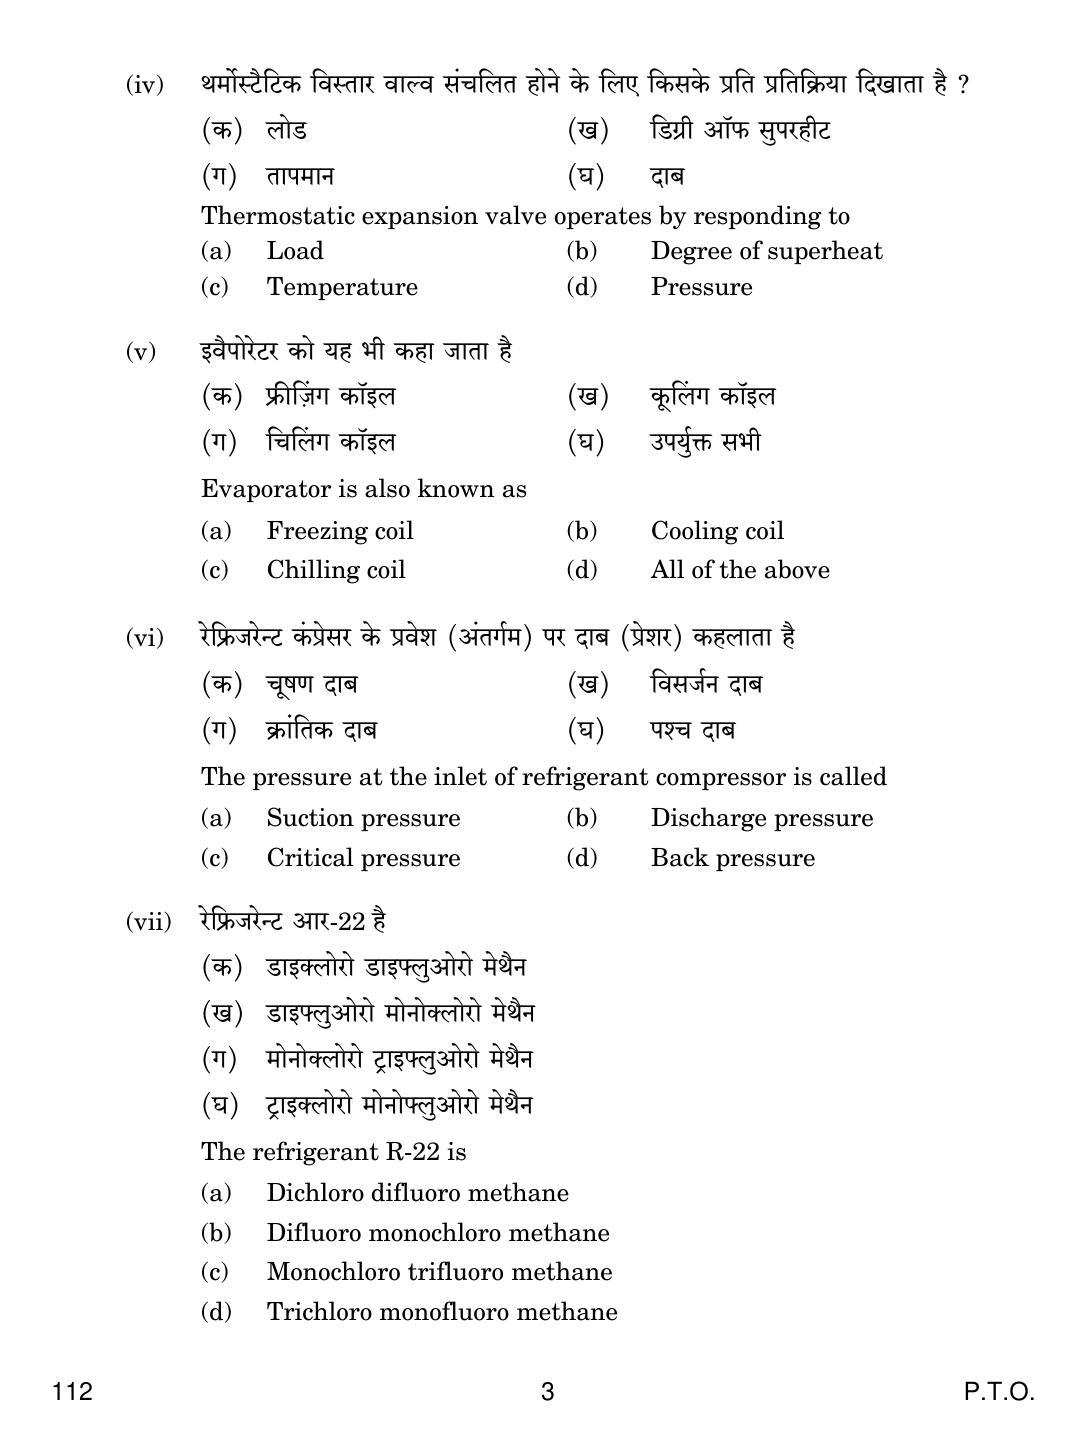 CBSE Class 12 112 Air-Conditioning And Refrigeration-III 2019 Question Paper - Page 3